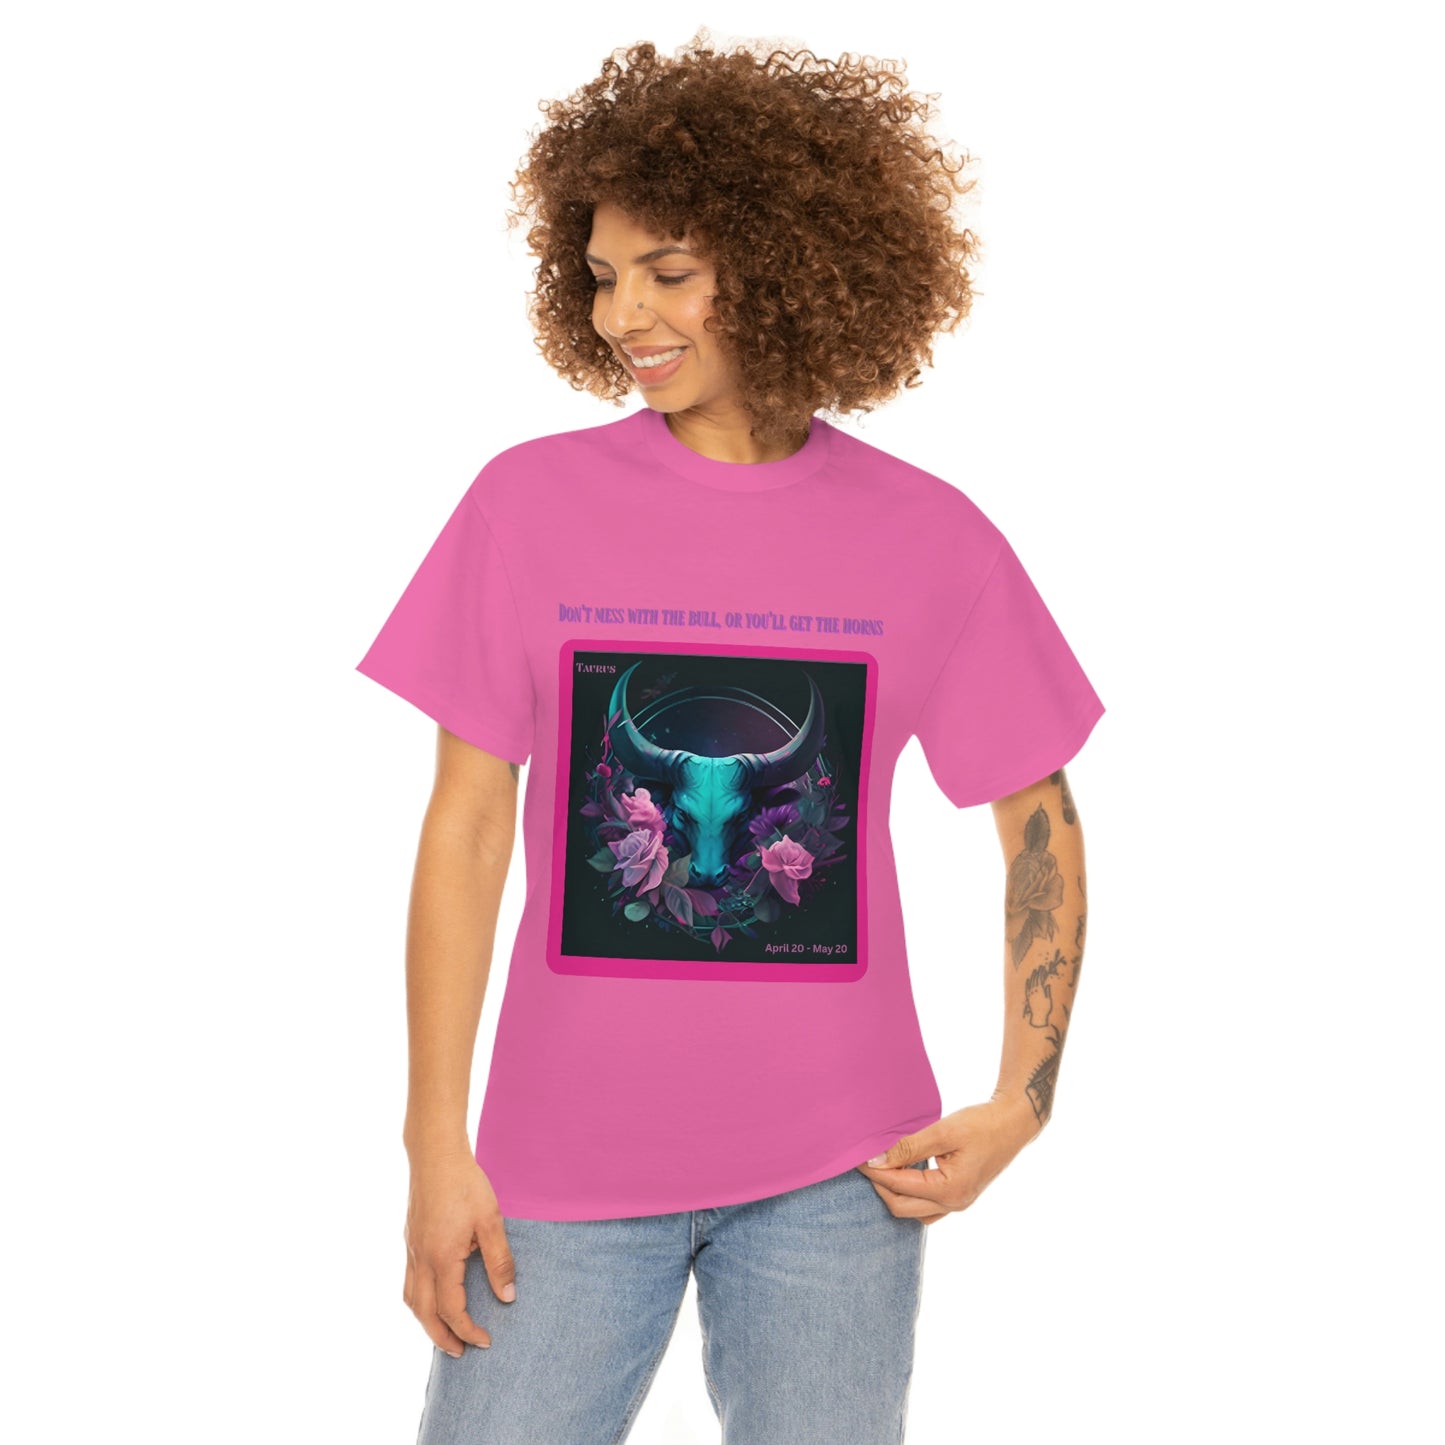 Don't Mess With The Bull Taurus T-shirt